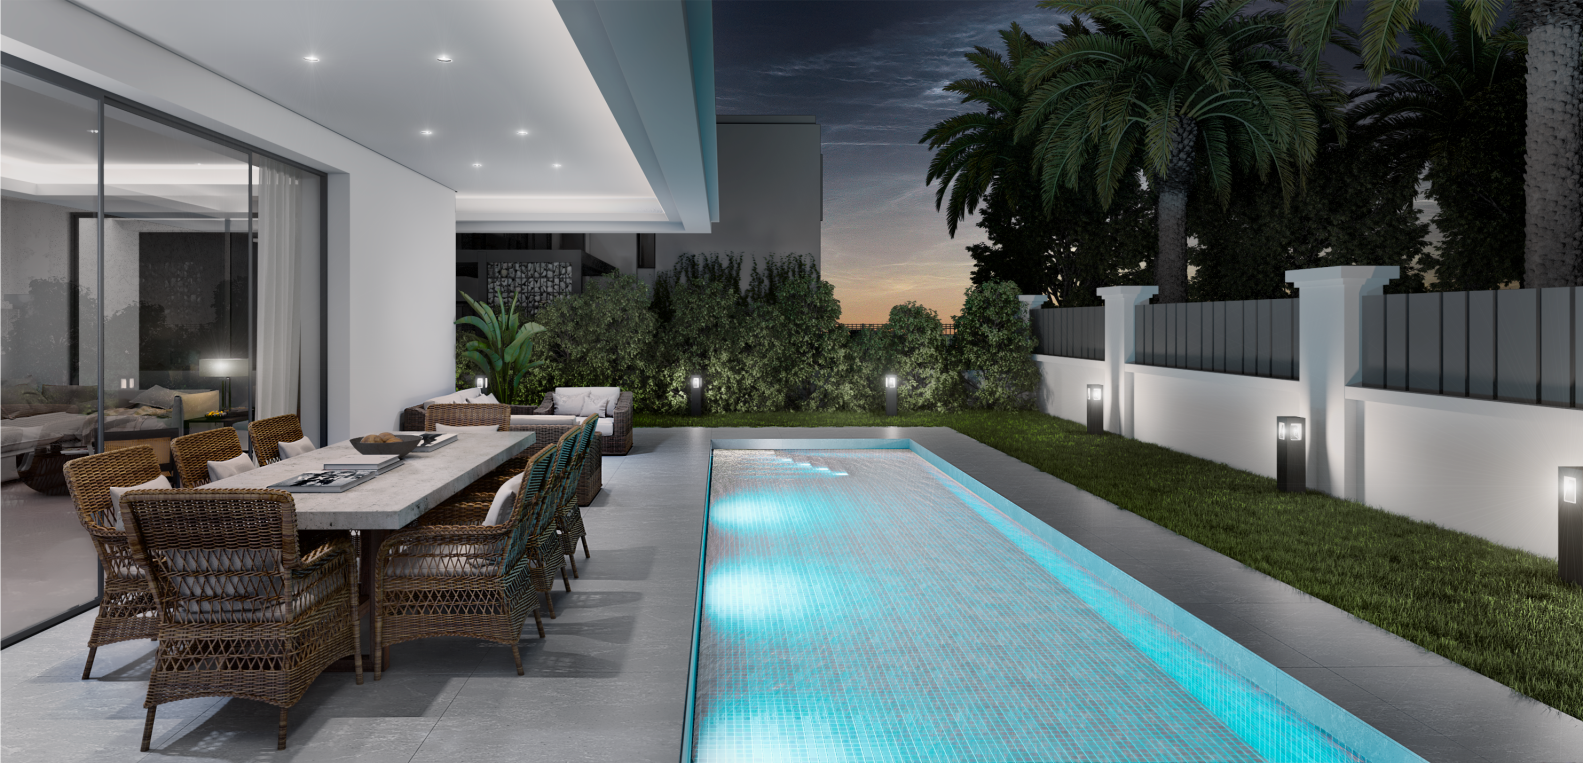 Off plan second line beach modern villas for sale on the Golden Mile – Marbella